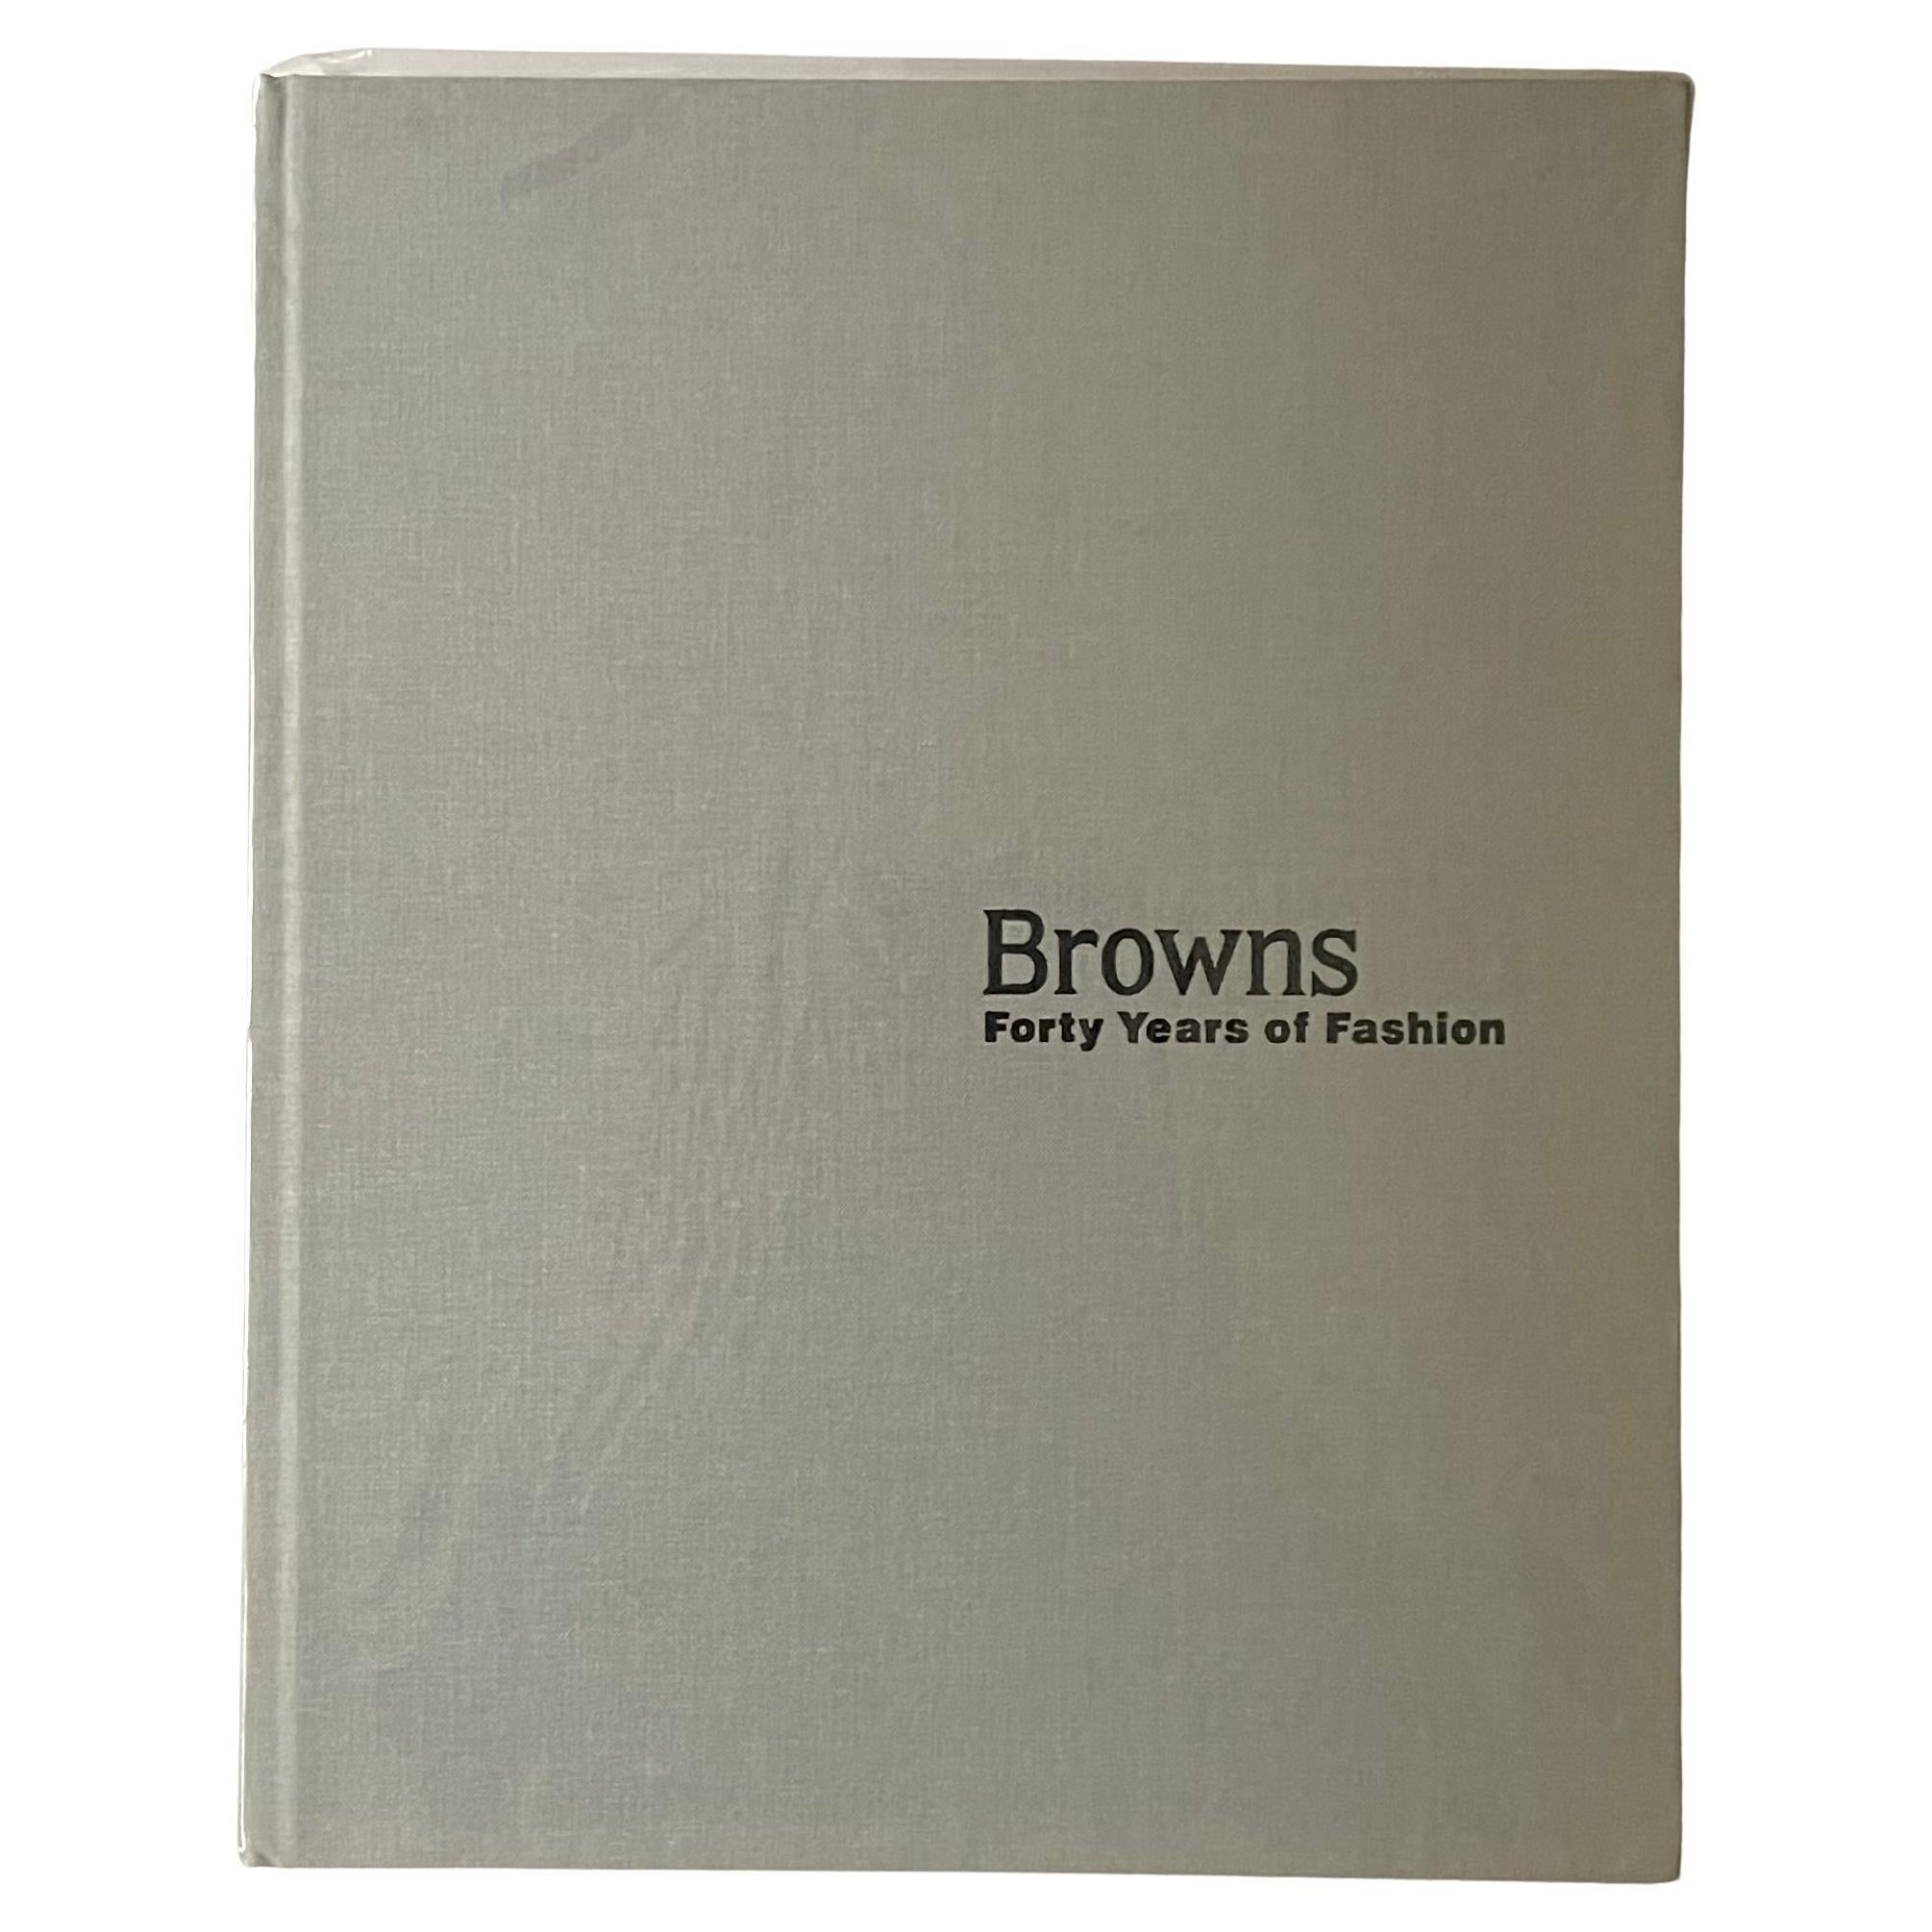 Browns: Forty Years of Fashion - 1st edition, London, 2010